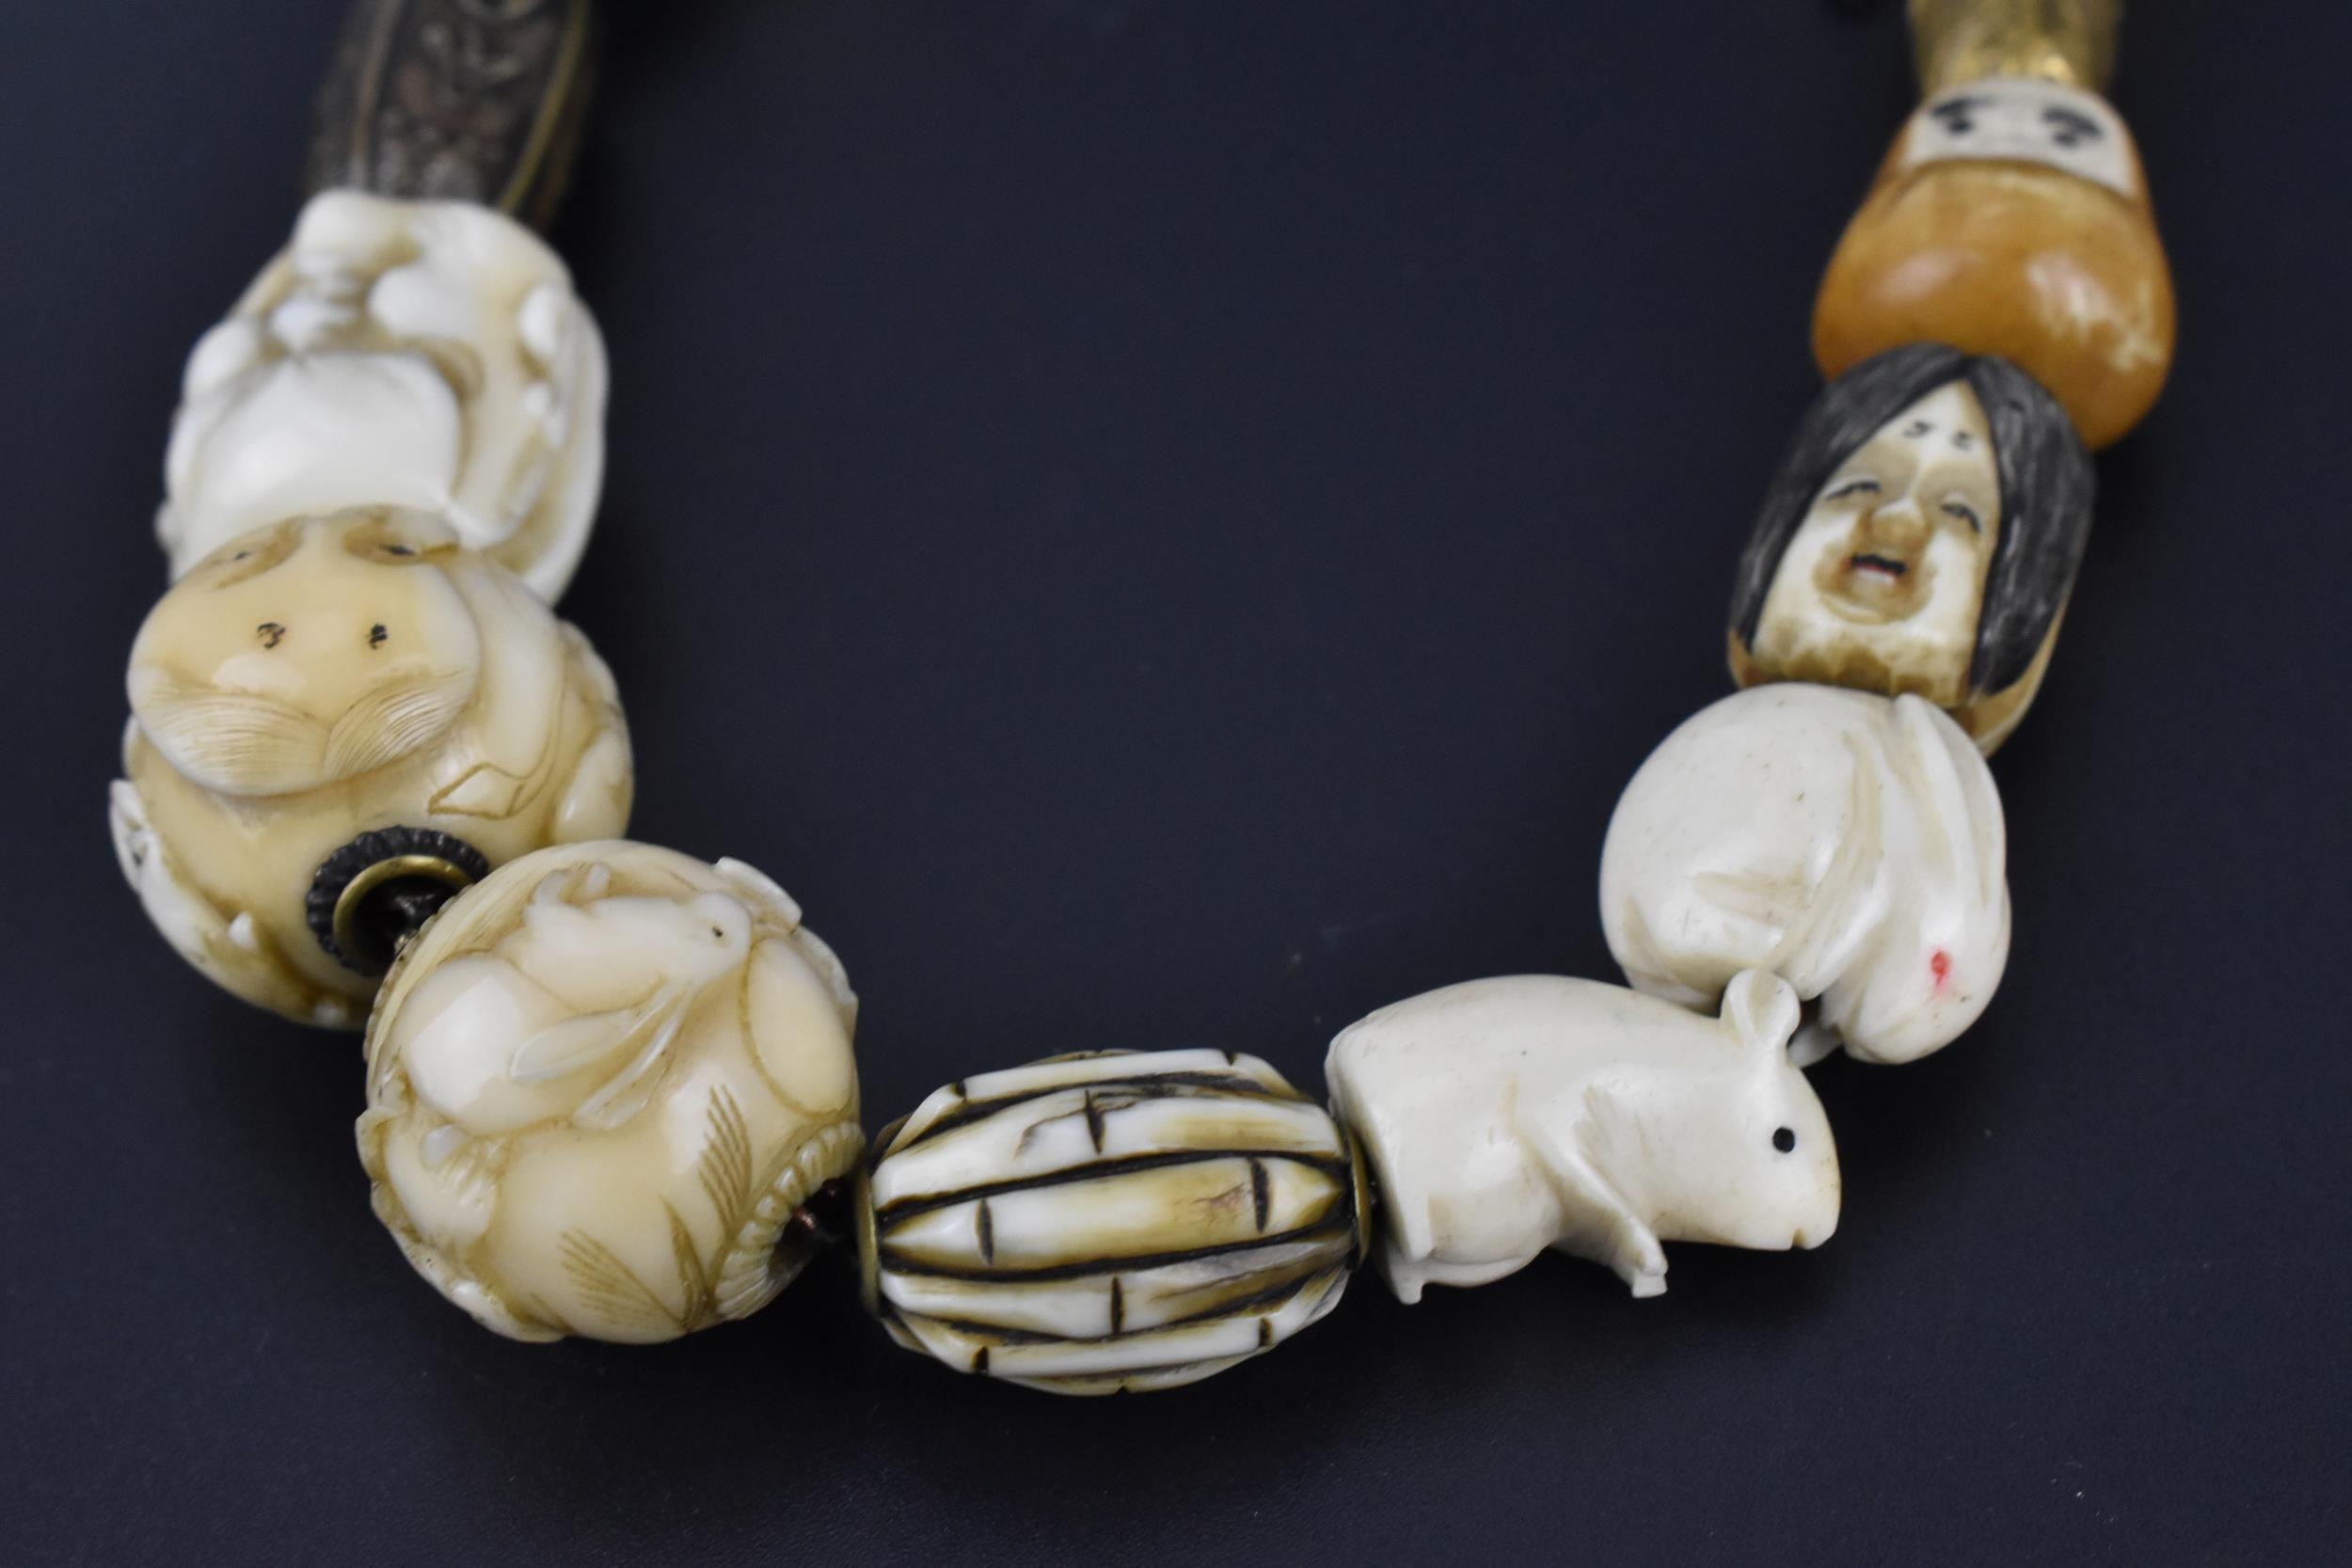 A 19th century Japanese ojime bead necklace, with carved ivory, bone, and metal ojimes, modelled - Bild 3 aus 7